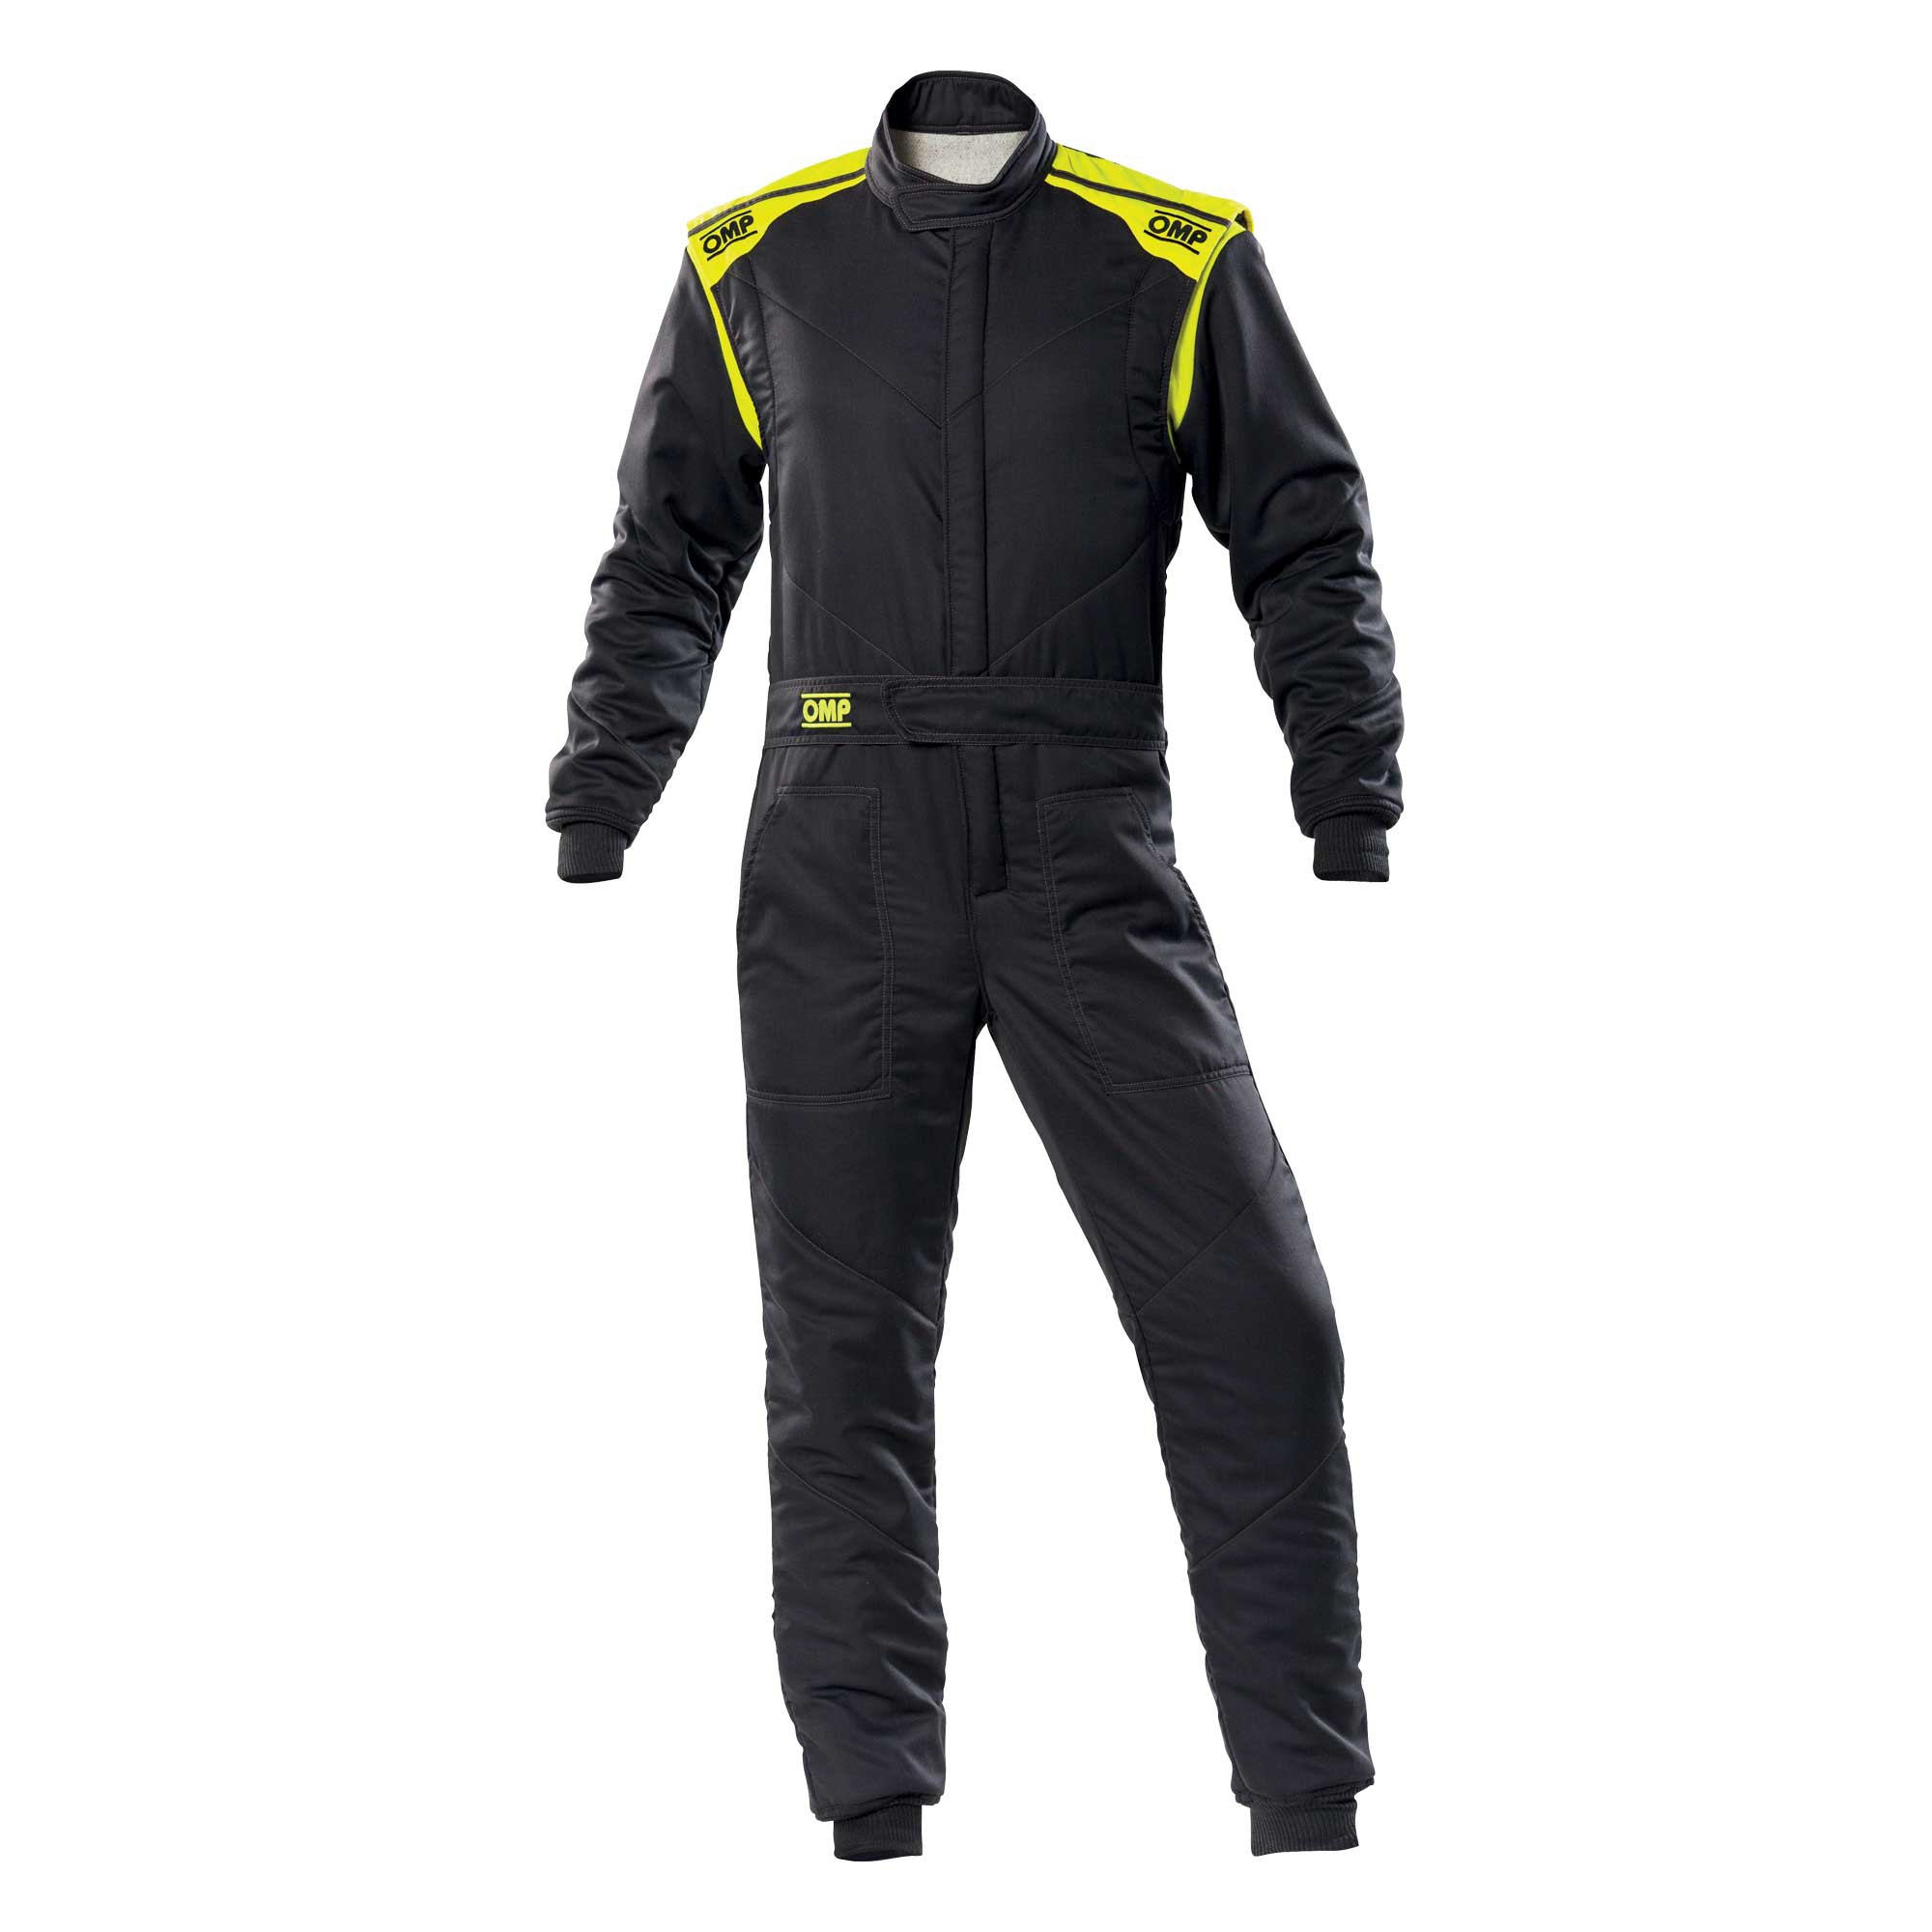 OMP IA0-1828-E01-184-56 (IA01828D18456) Racing suit FIRST-S MY2020, FIA 8856-2018, Anthracite/Fluo yellow, size 56 (Photo-1)